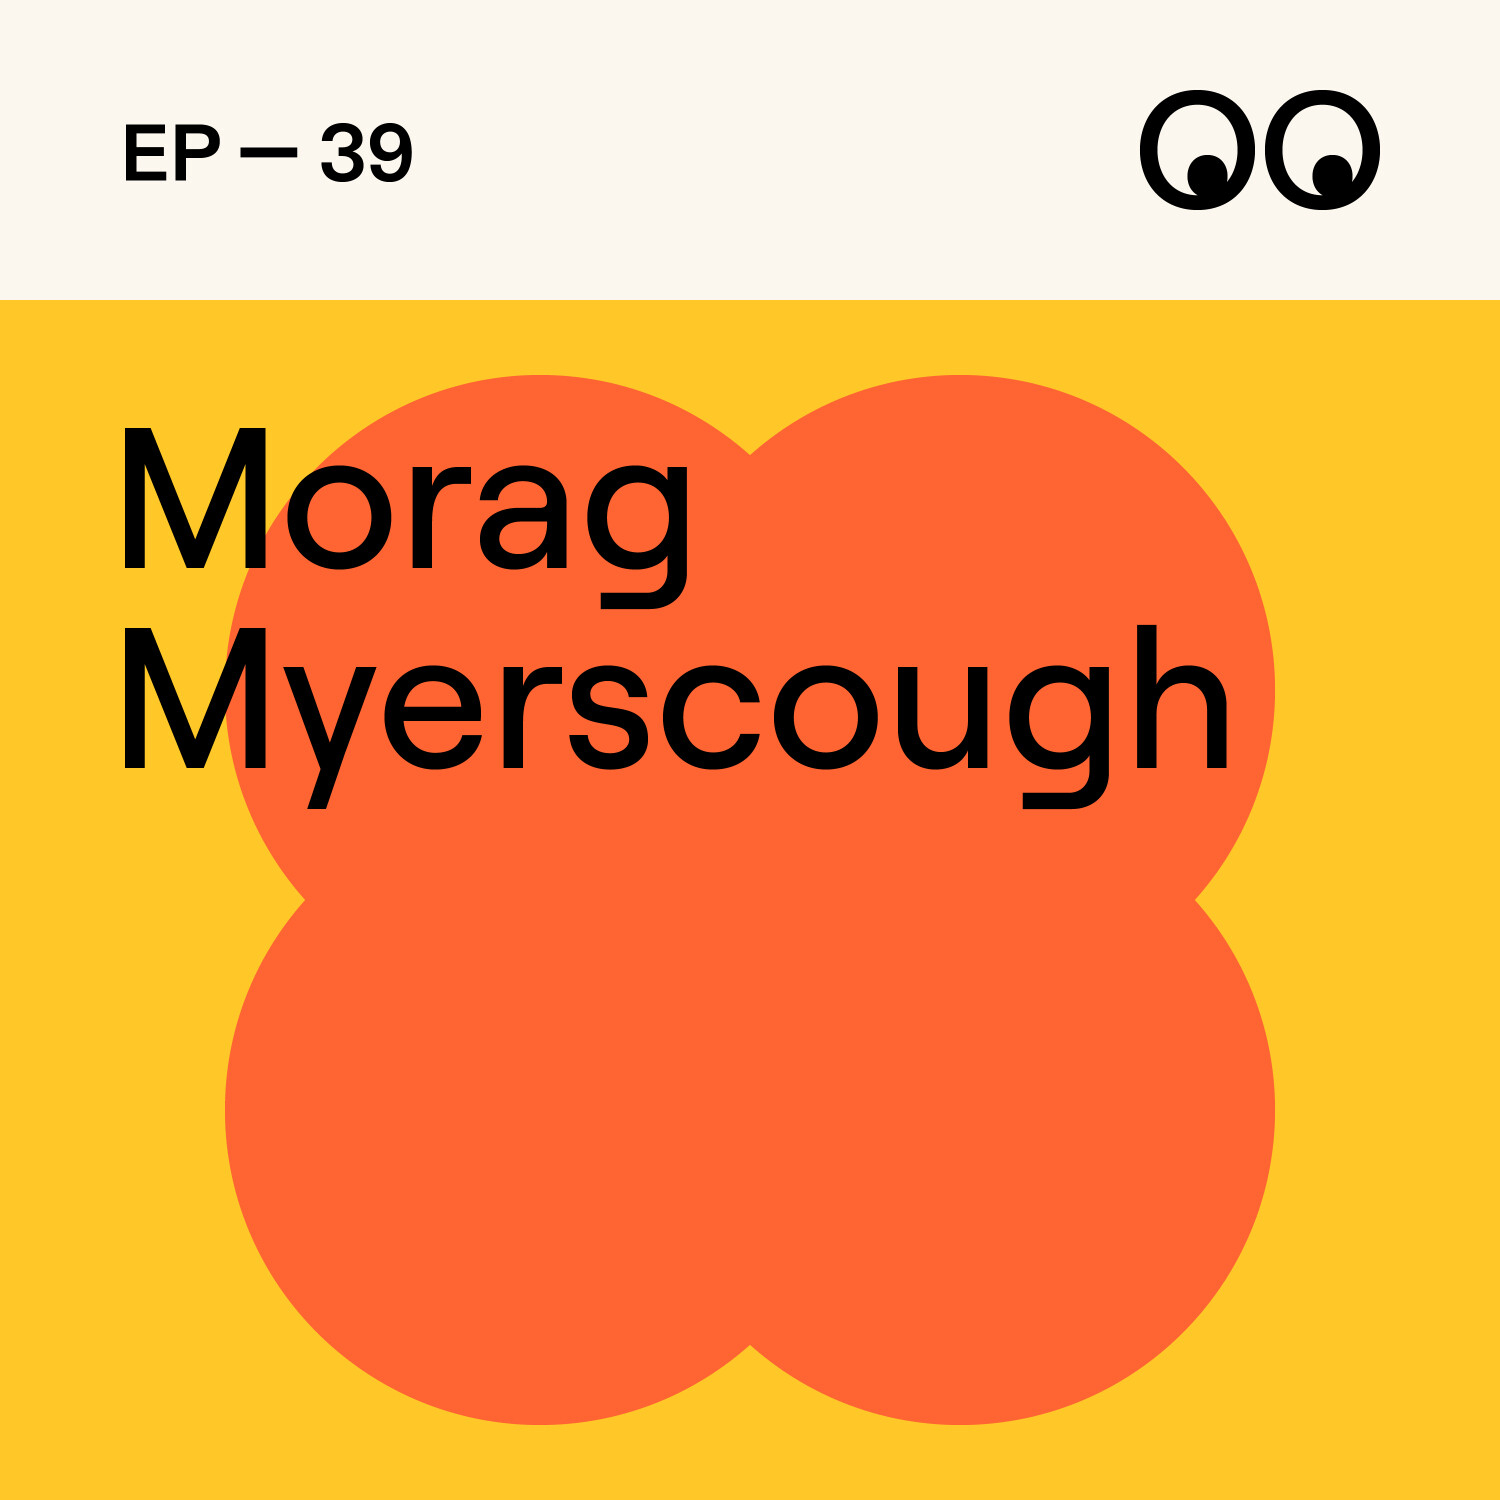 Finding joy in belonging and embracing the ‘now’, with Morag Myerscough